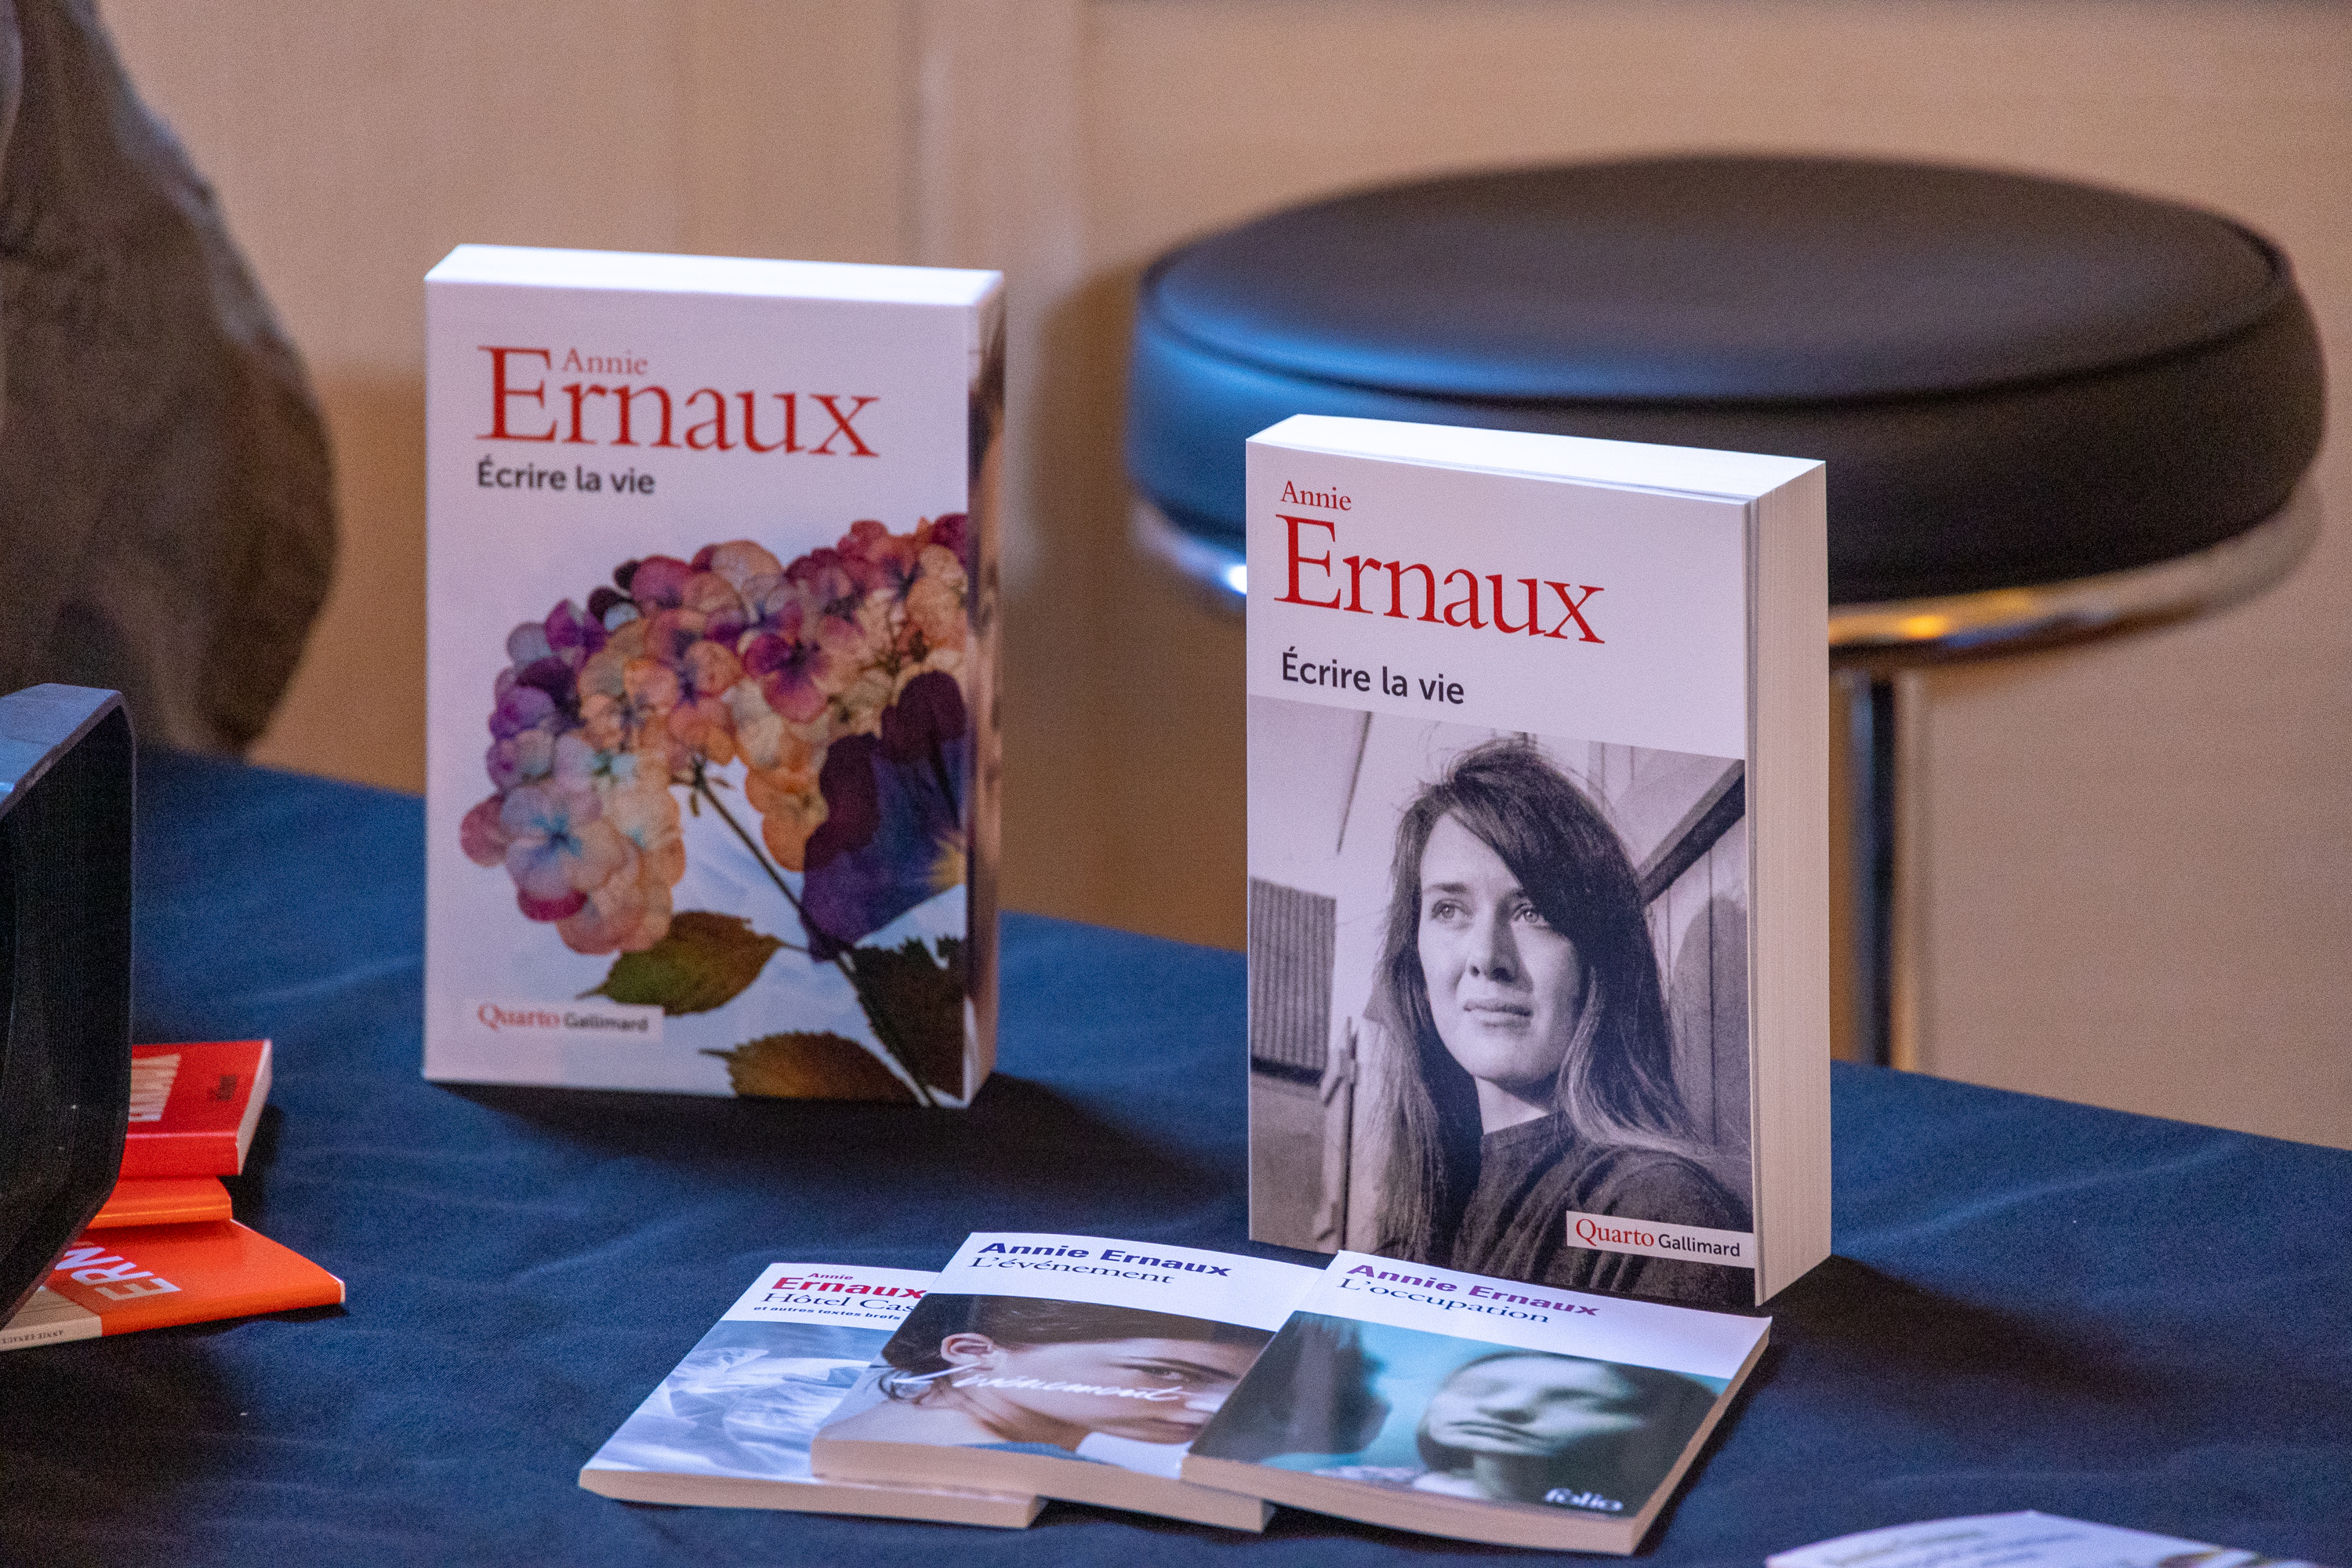 A close-up of French author Annie Ernaux's book as she gives a press conference after winning Nobel Prize in Literature on October 06, 2022 in Paris, France. Image: Marc Piasecki / Getty Images